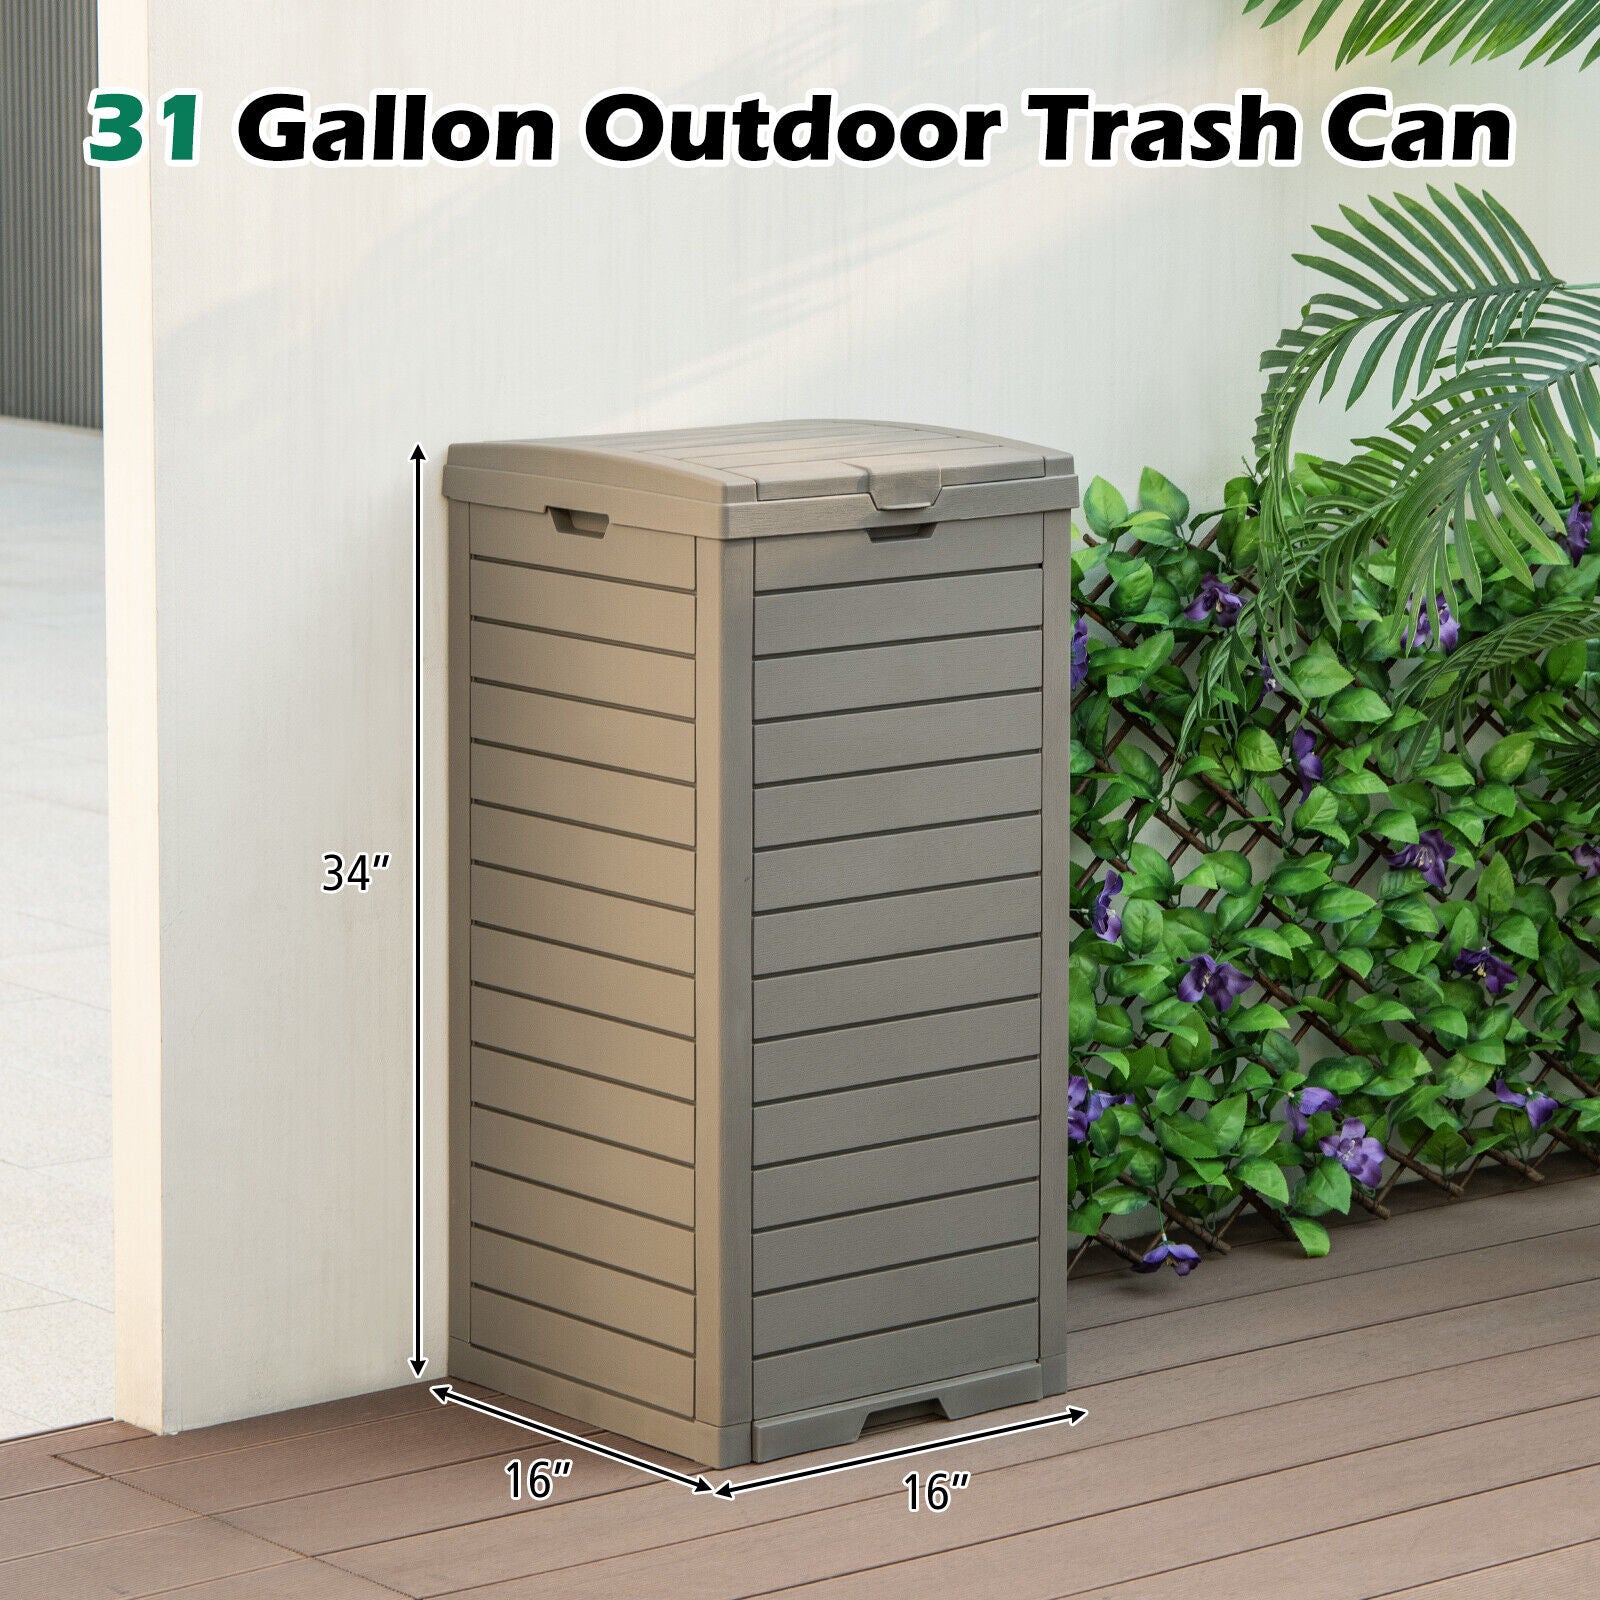 Trash Can with Dual Lid - 31 Gallon Outdoor Trashcan